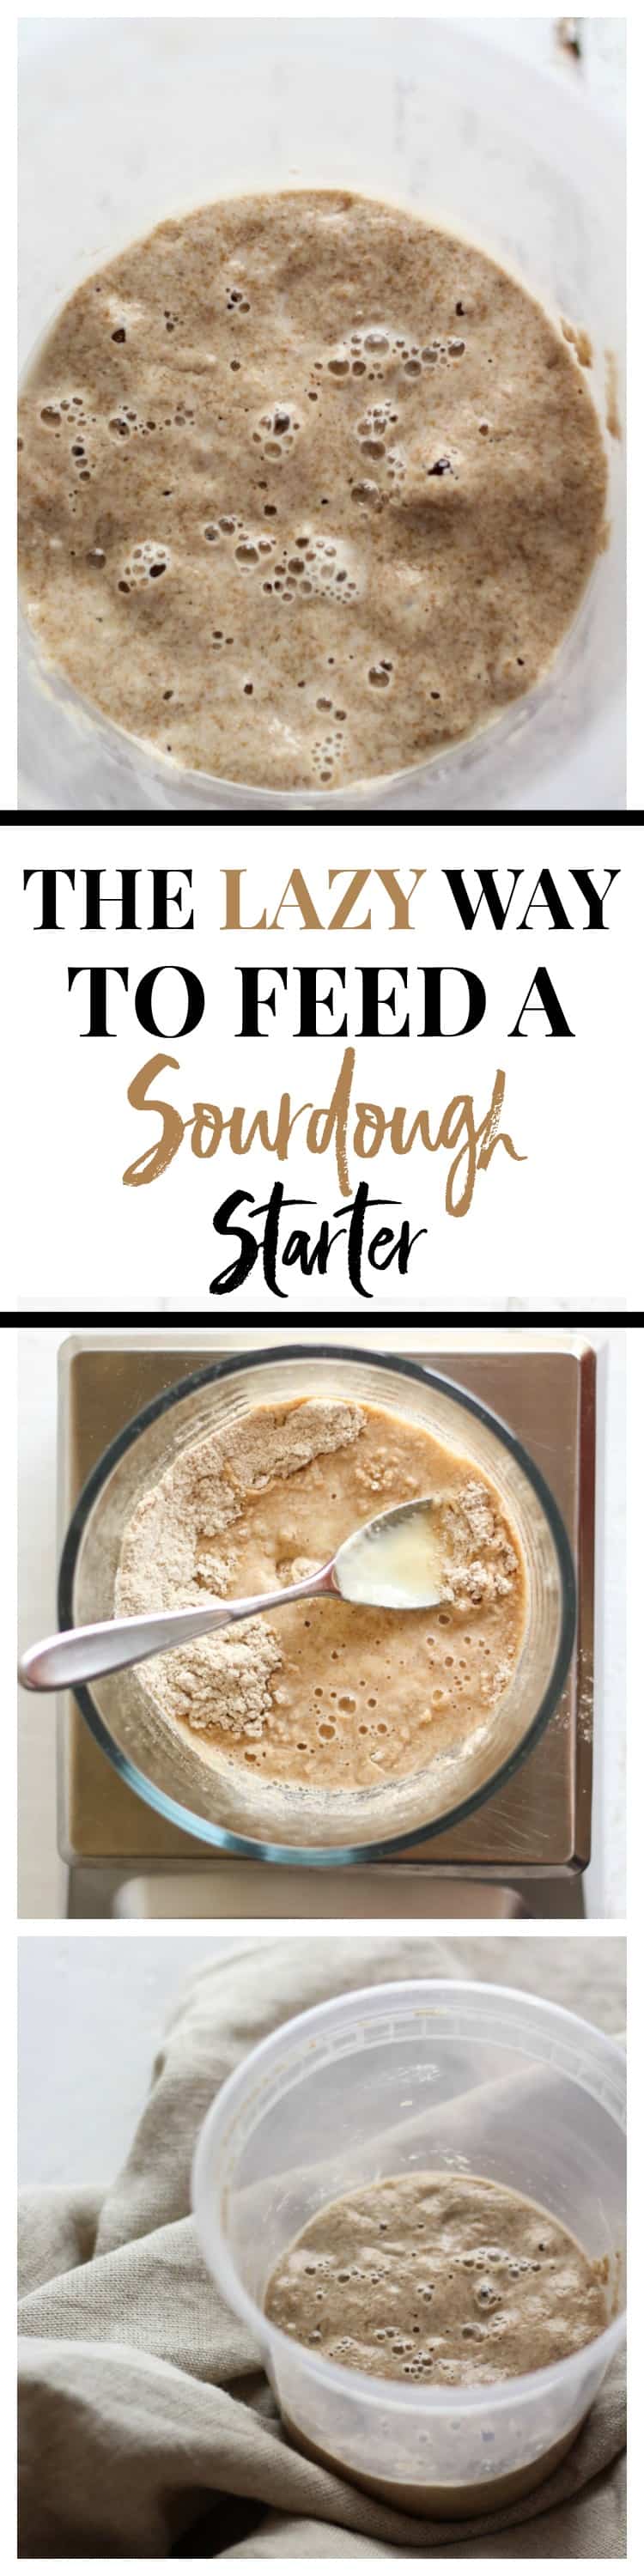 The easy way to feed a sourdough starter